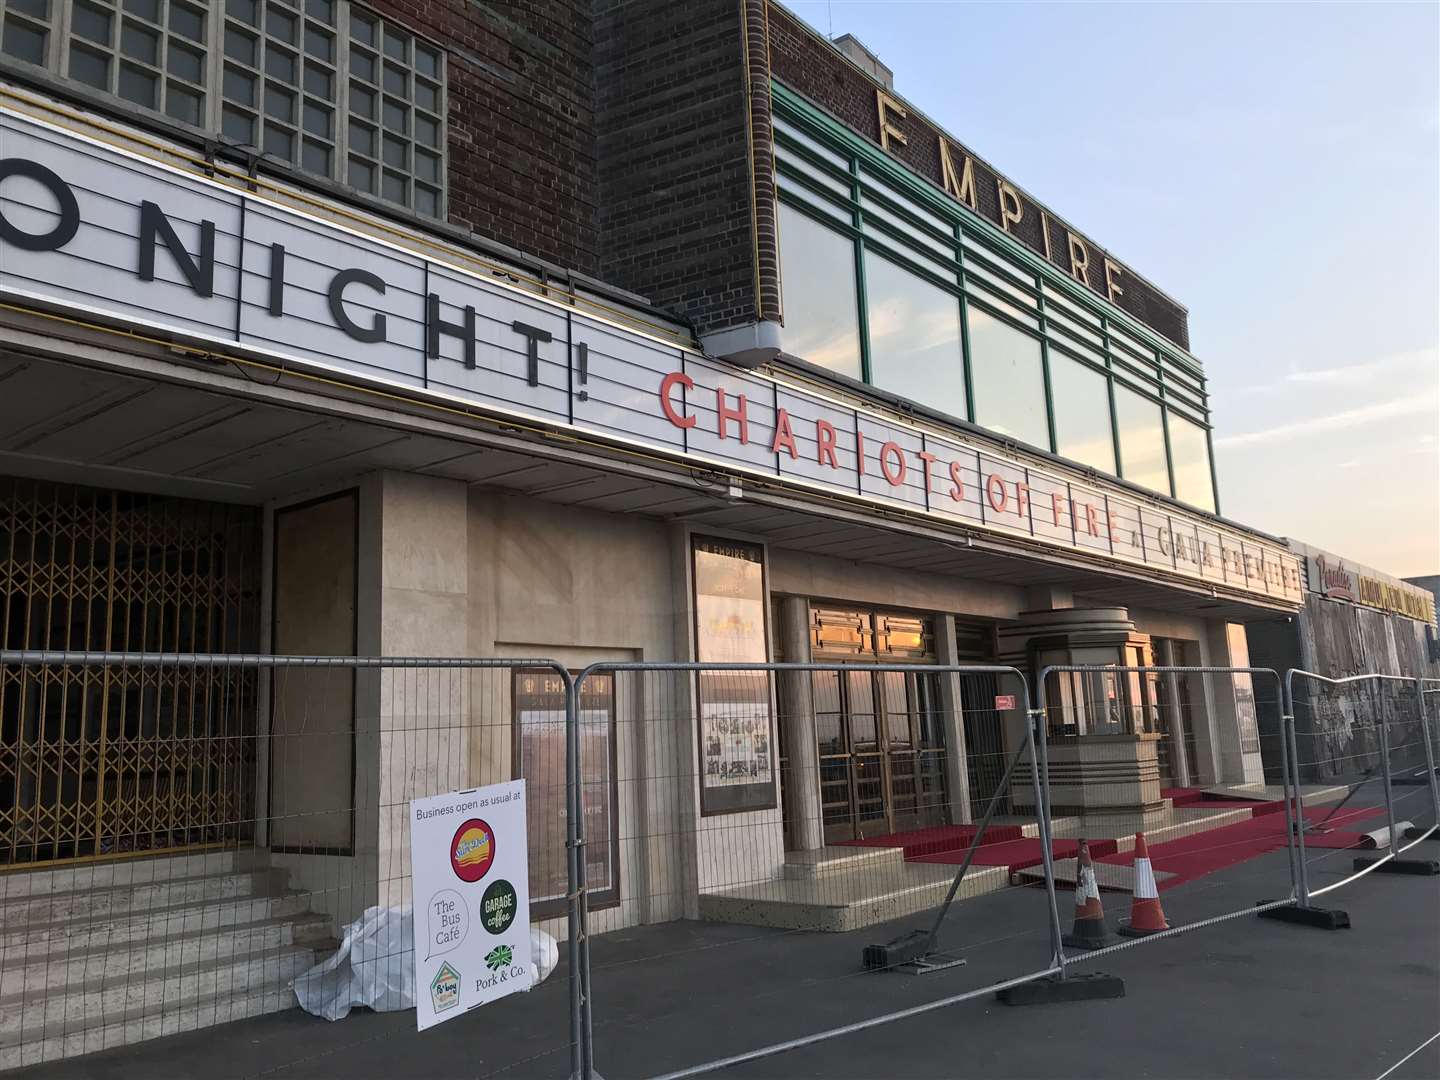 The old Dreamland cinema transformed for filming early last year